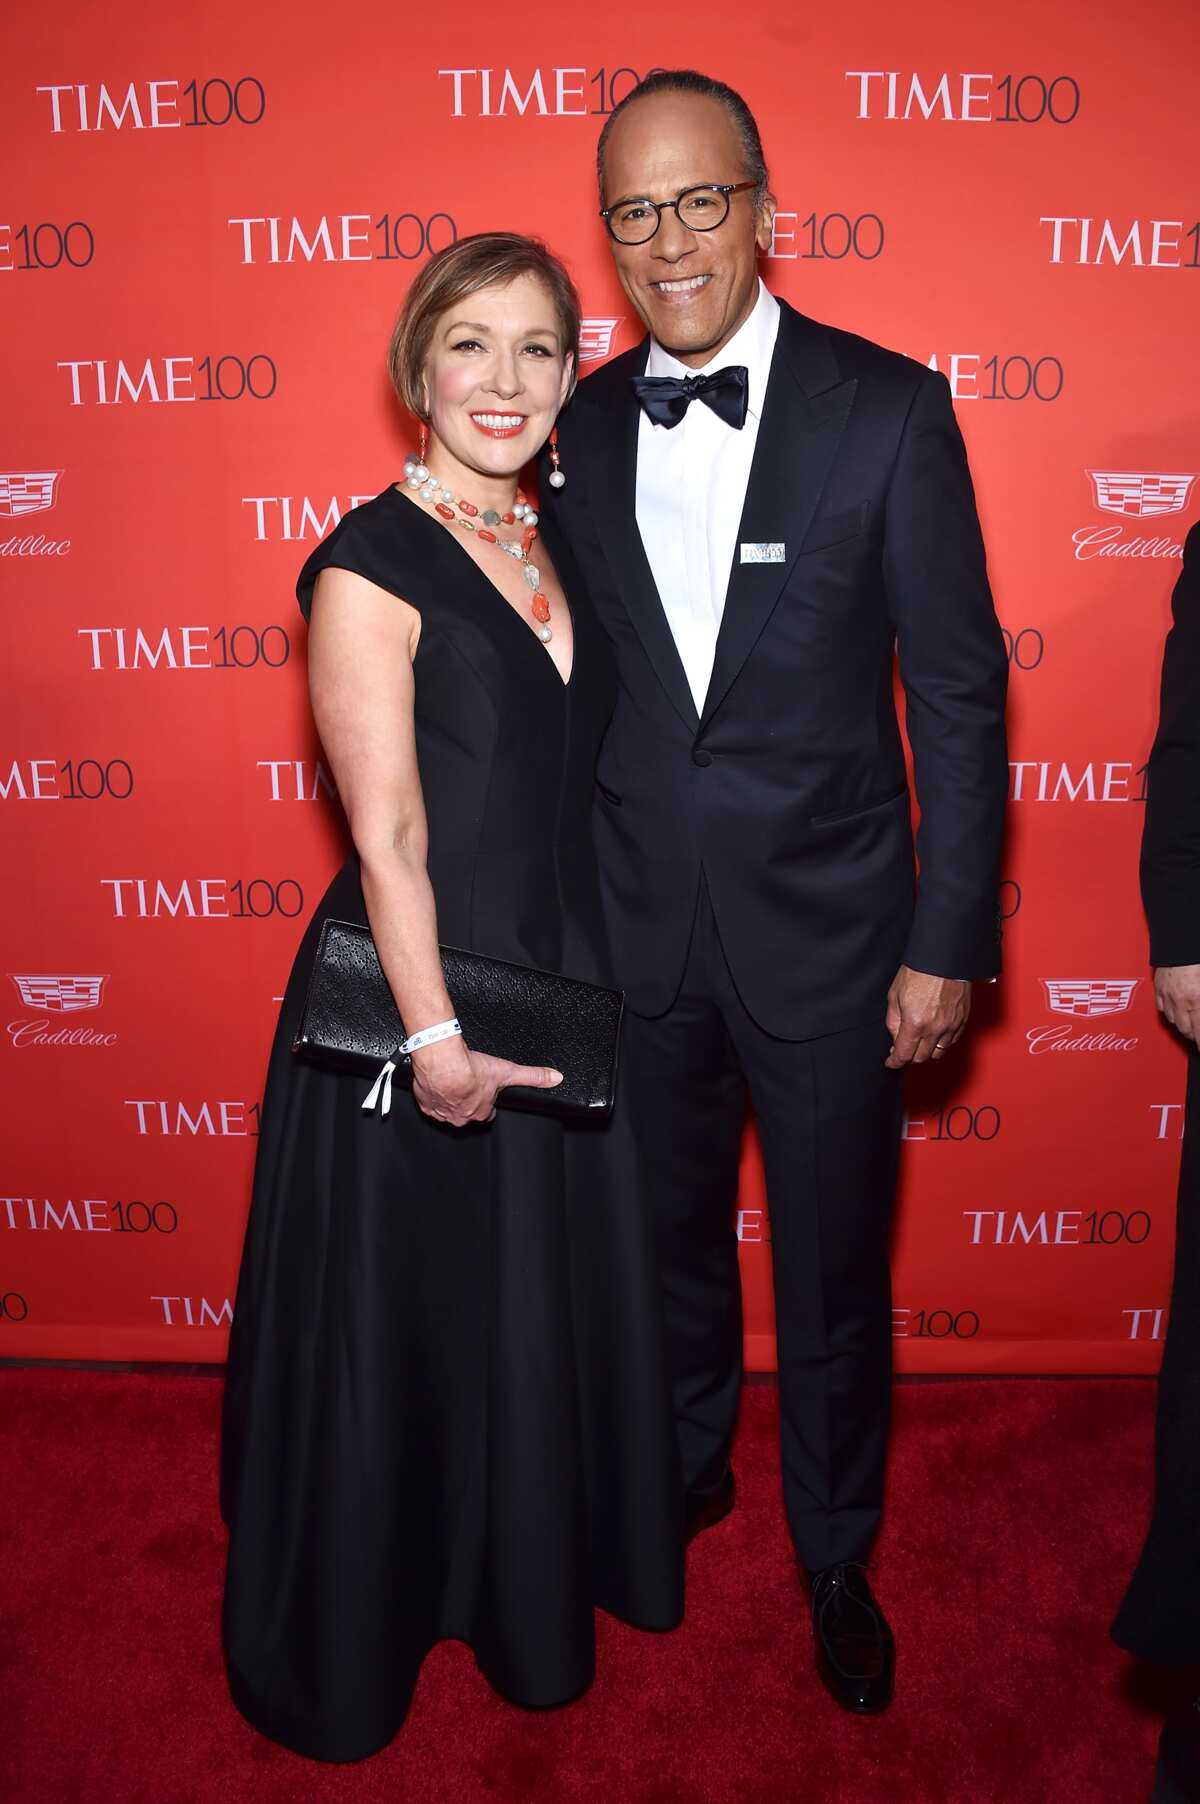 Carol Hagen biography what is known about Lester Holt’s wife? Legit.ng